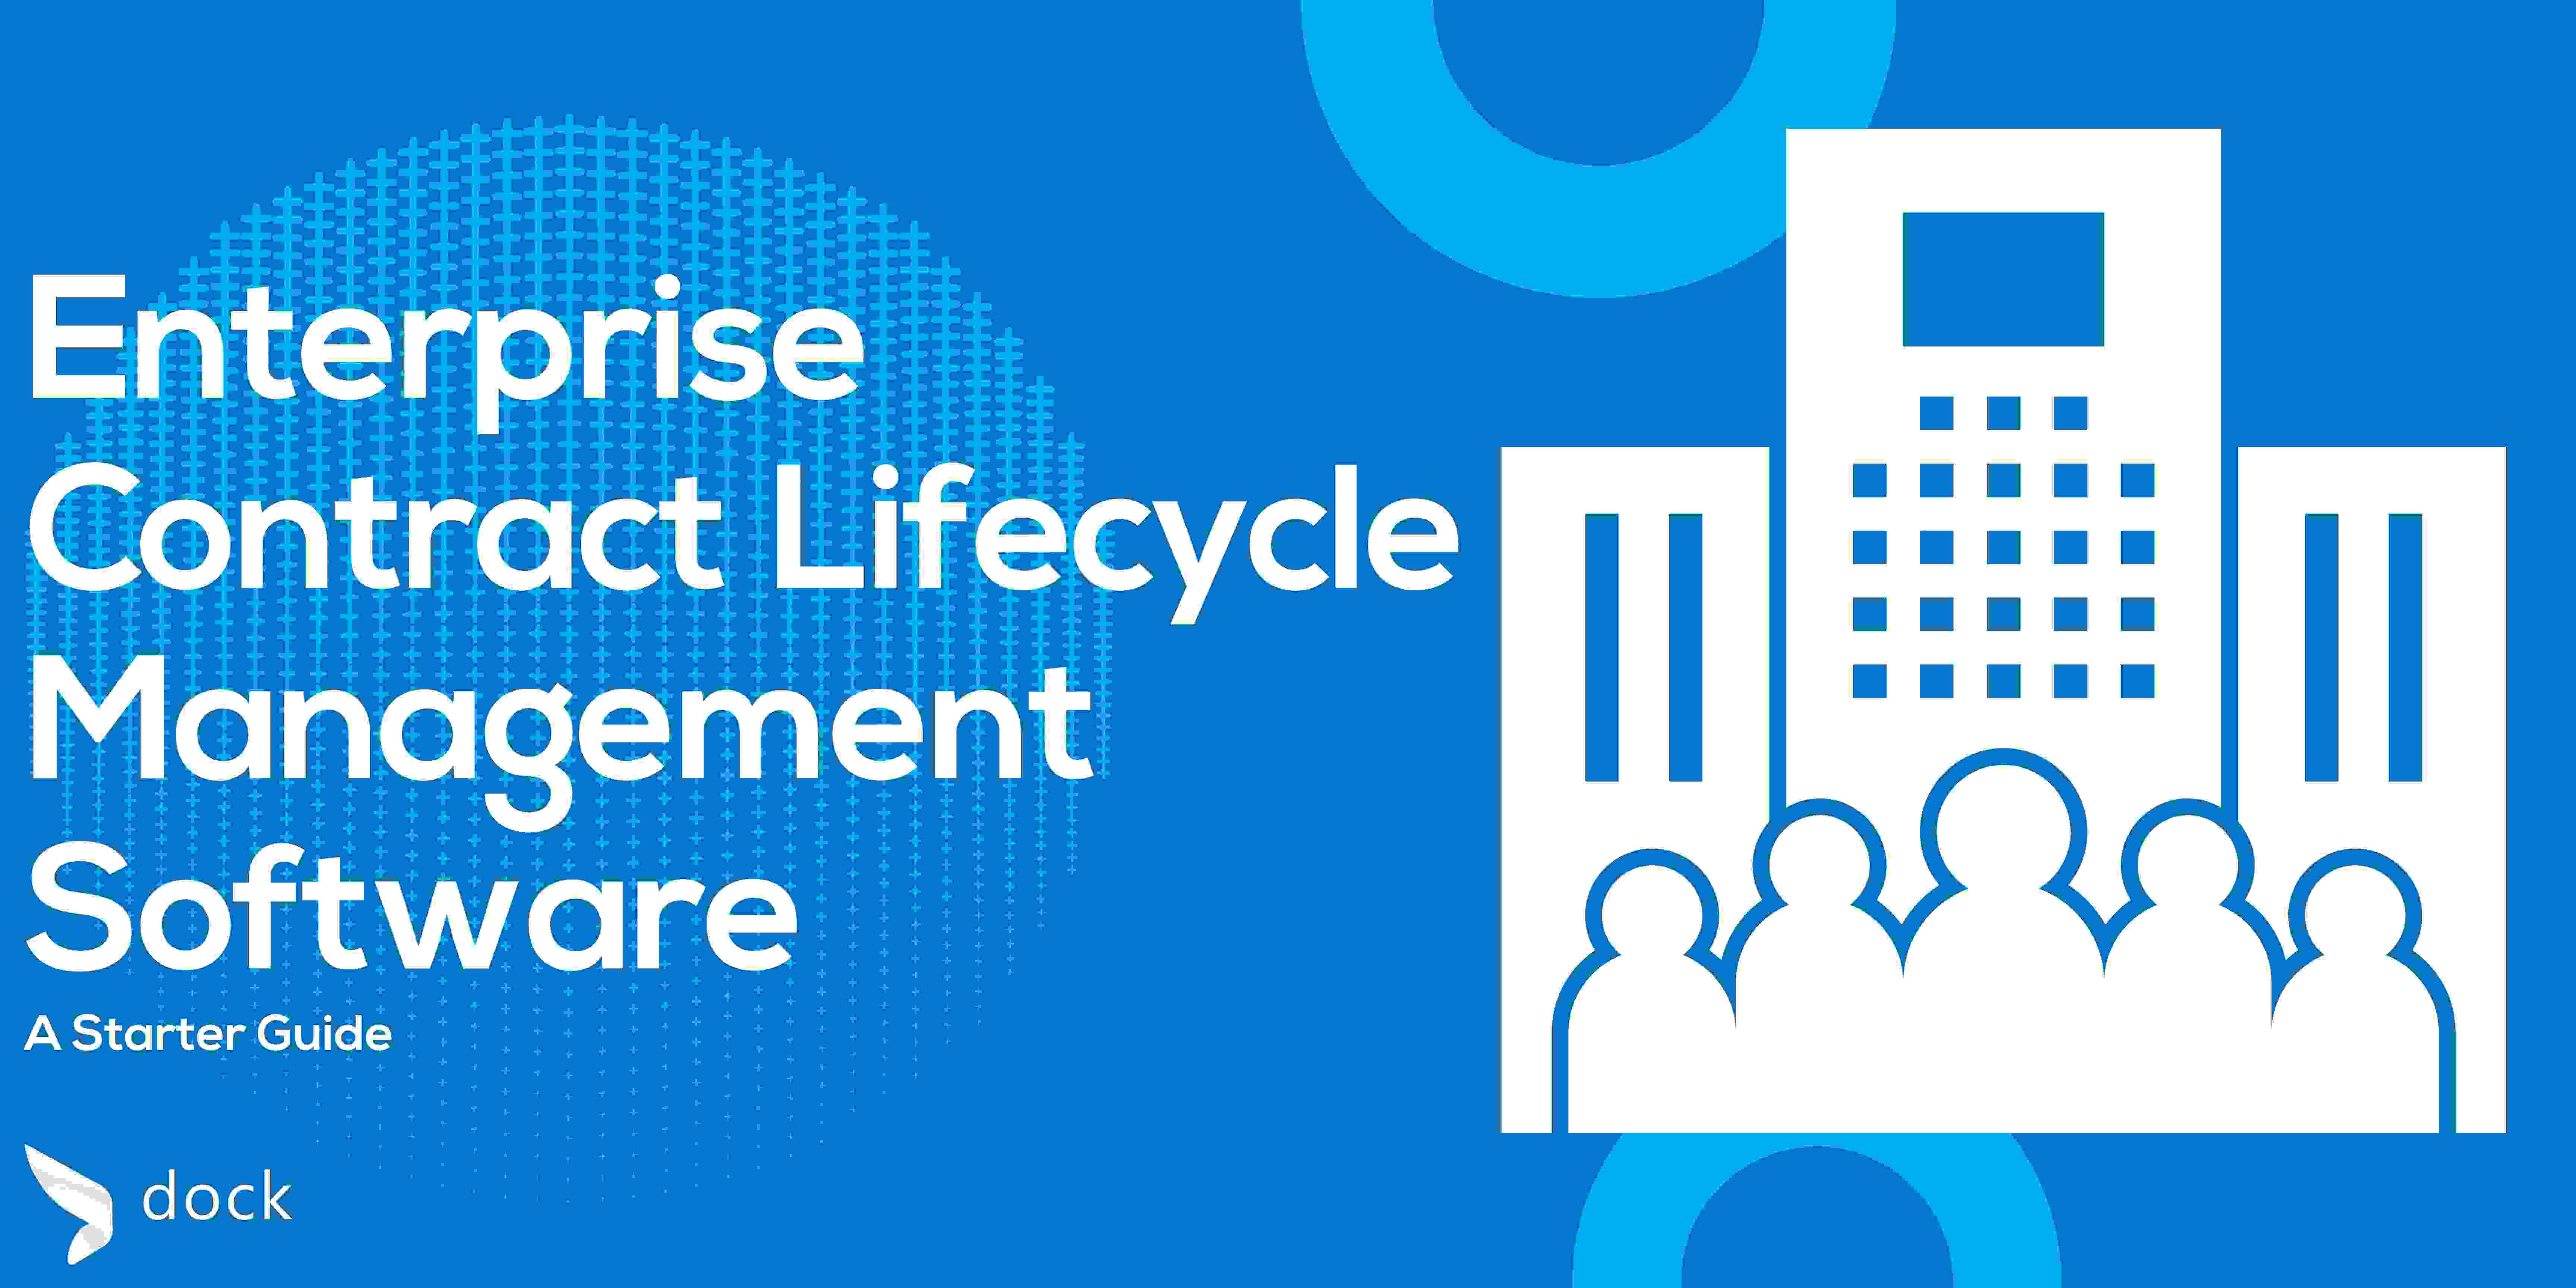 Enterprise Contract Lifecycle Management Software: A Starter Guide